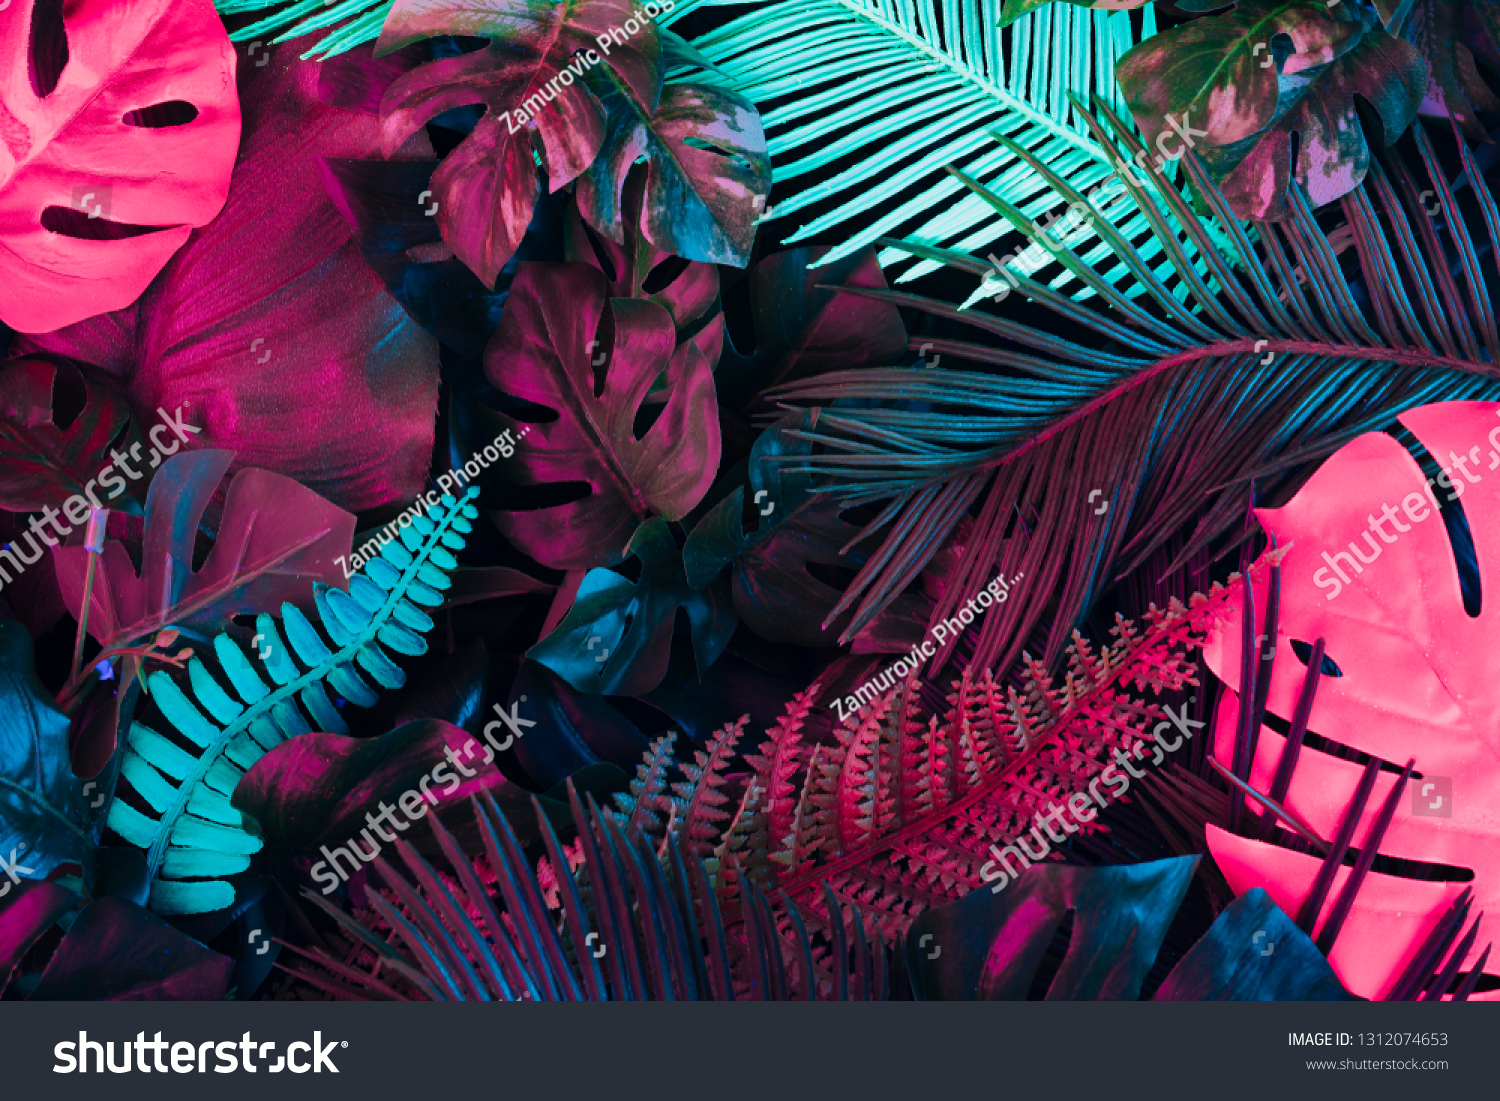 Creative fluorescent color layout made of tropical leaves. Flat lay neon colors. Nature concept. #1312074653